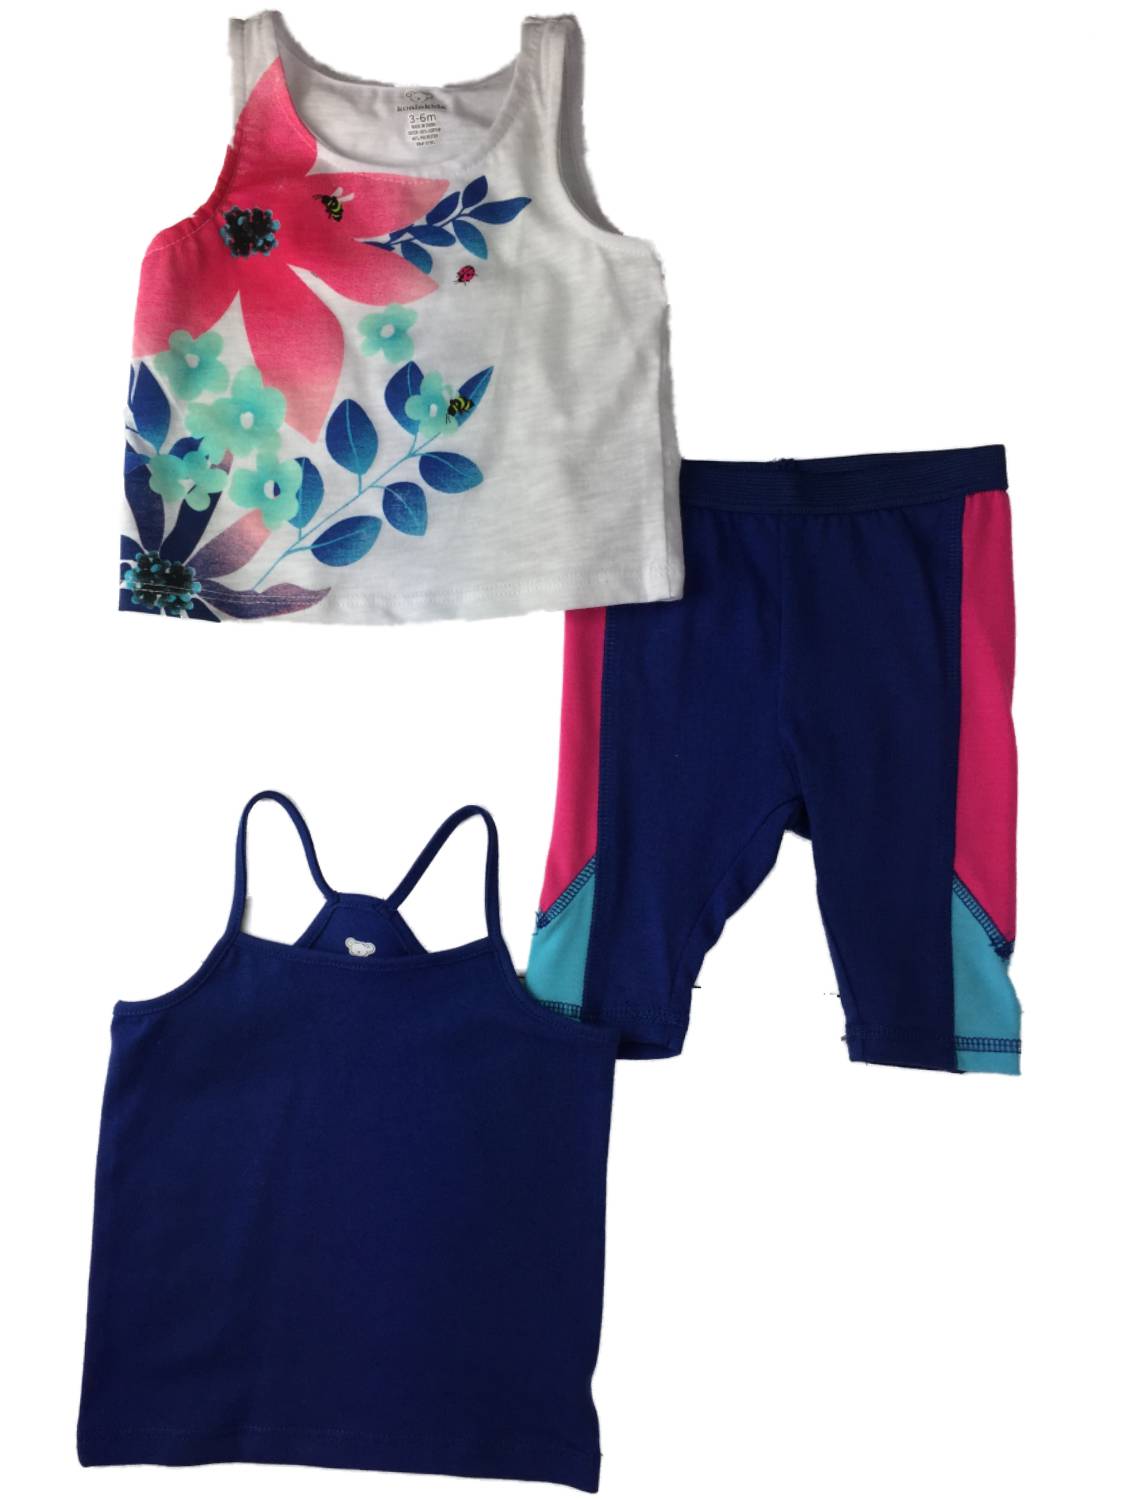 koala kids Infant Girls Pink Blue & Navy Tropical Floral Outfit 3 Pc Tank Top Shorts Outfit